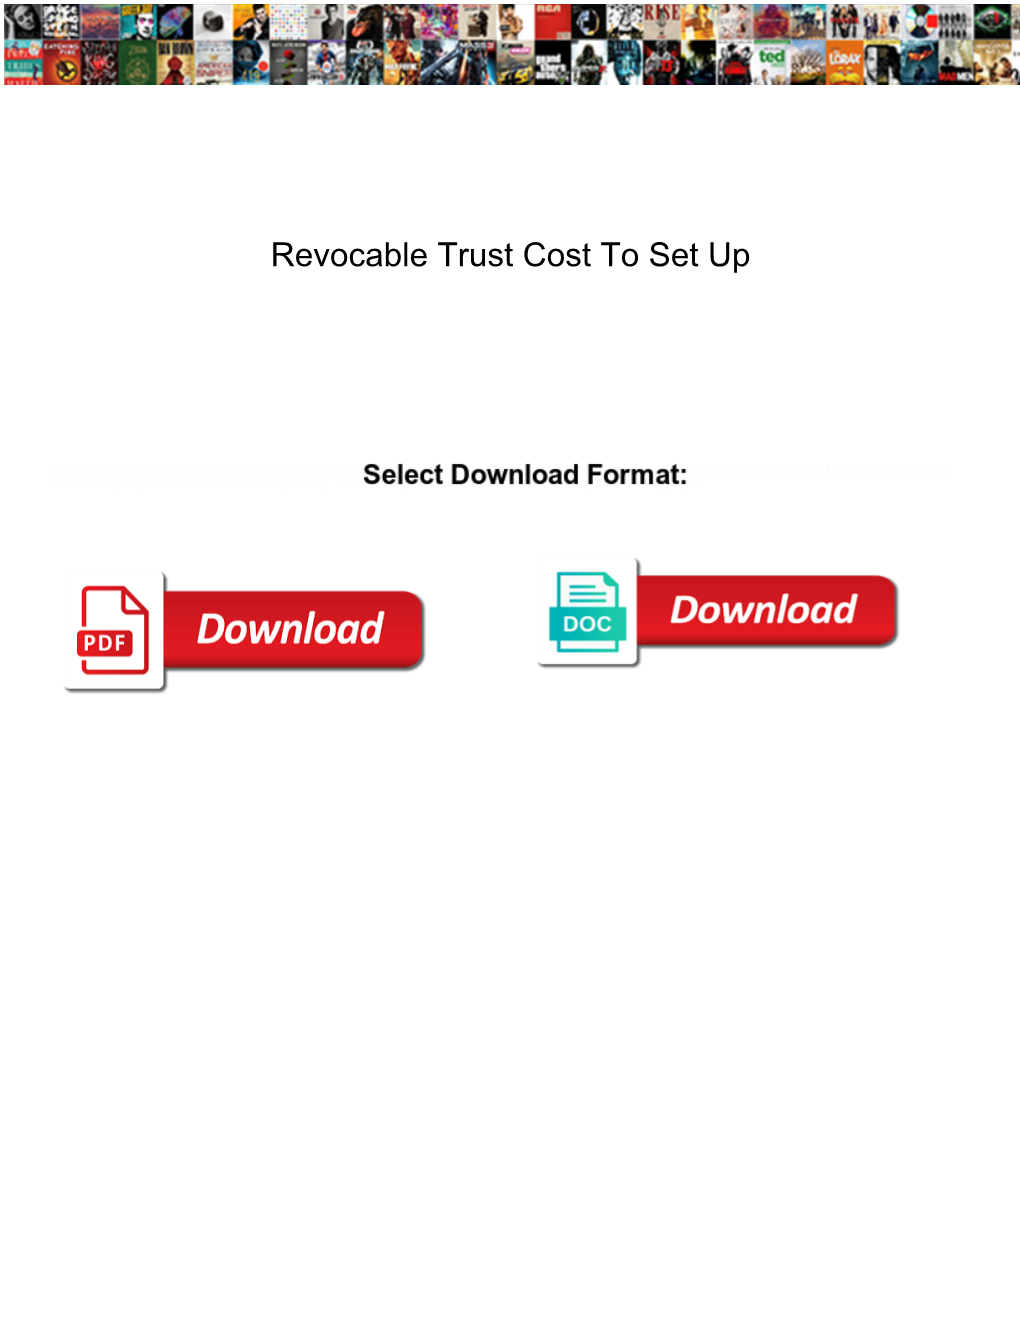 Revocable Trust Cost to Set Up